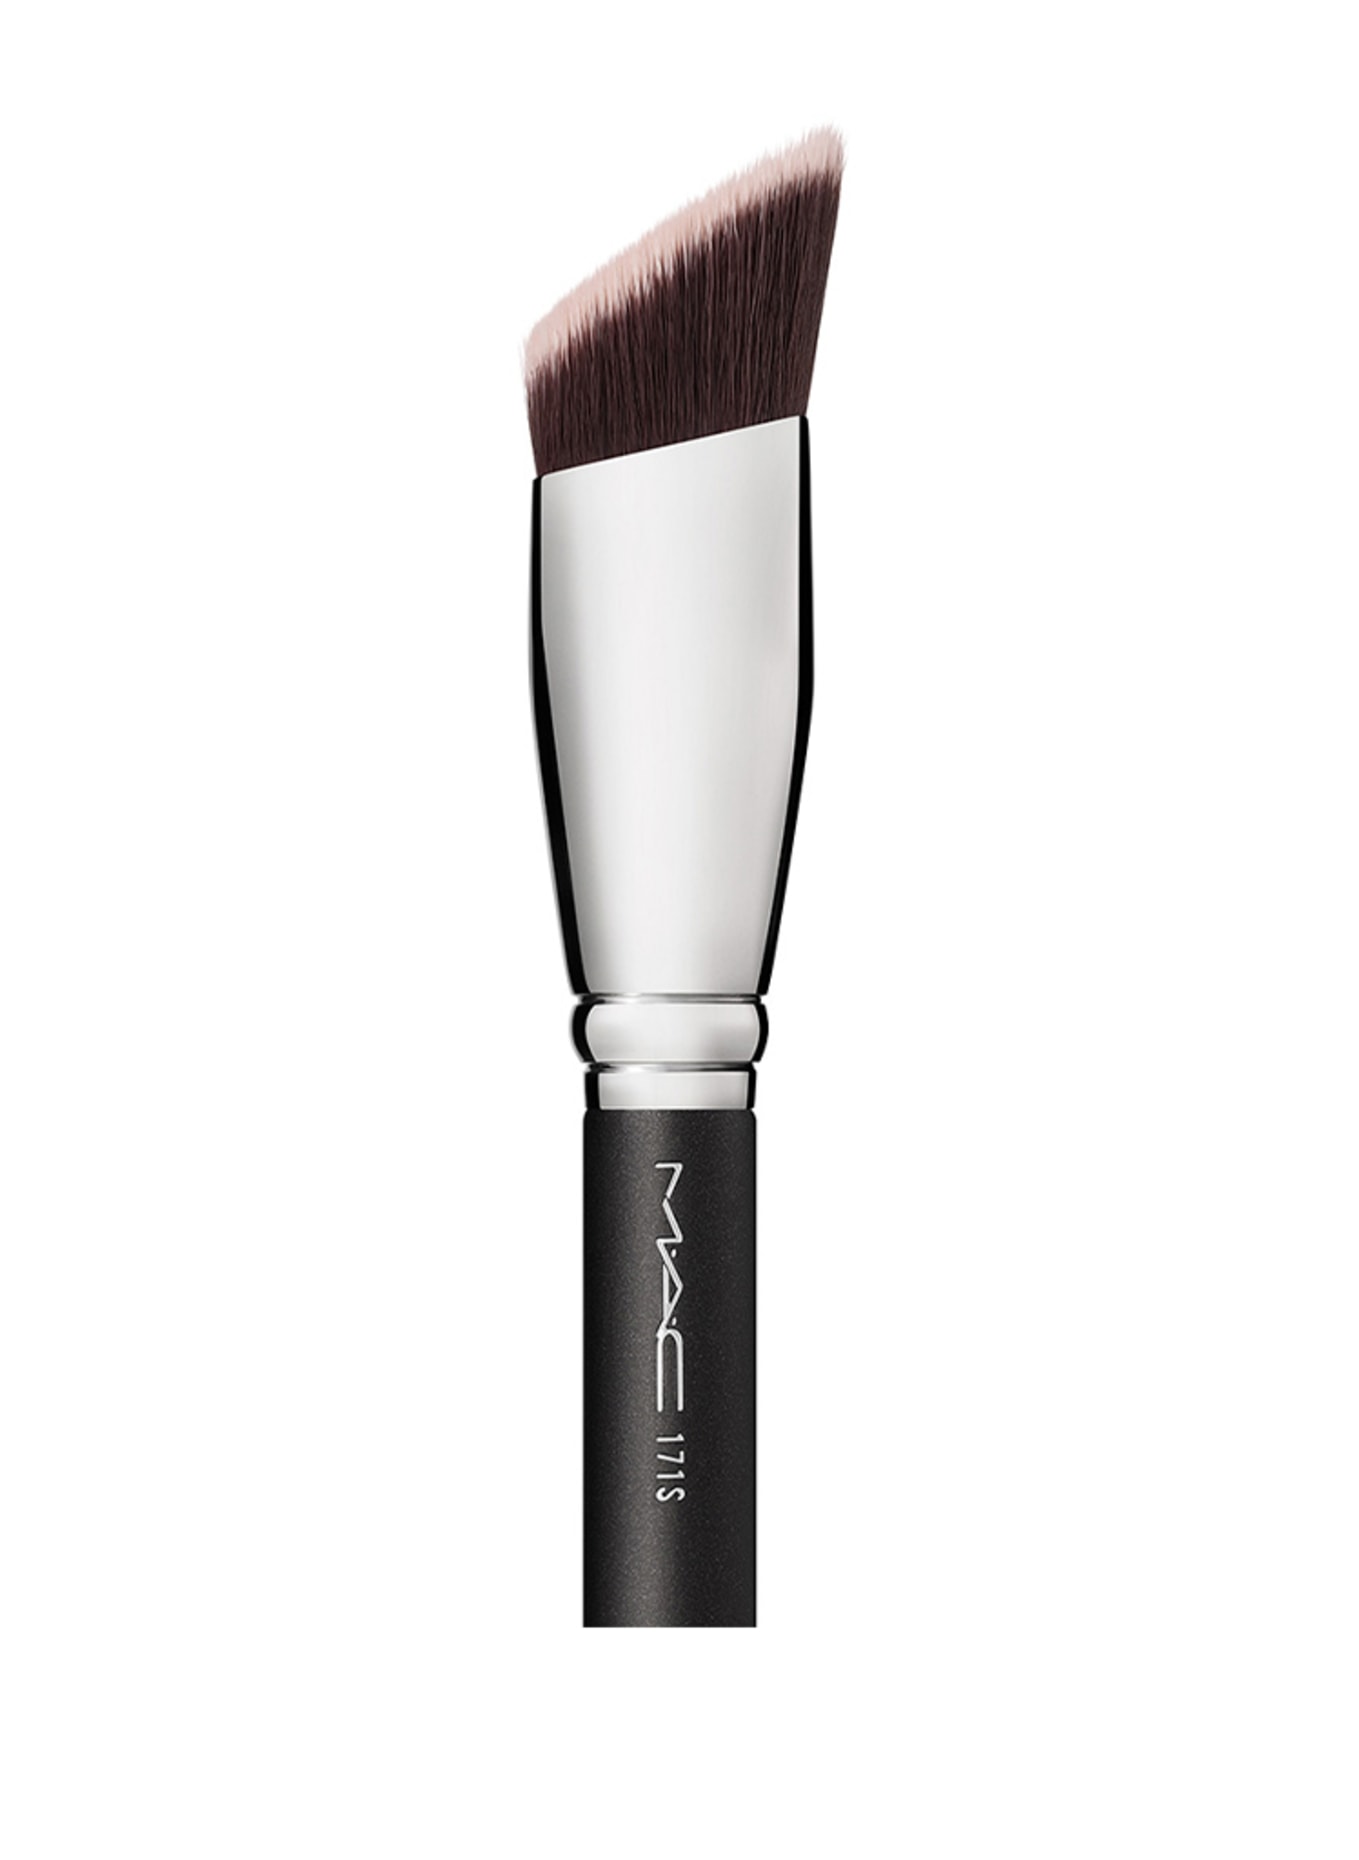 M.A.C SMOOTHE EDGE ALL OVER FACE BRUSH (Bild 2)